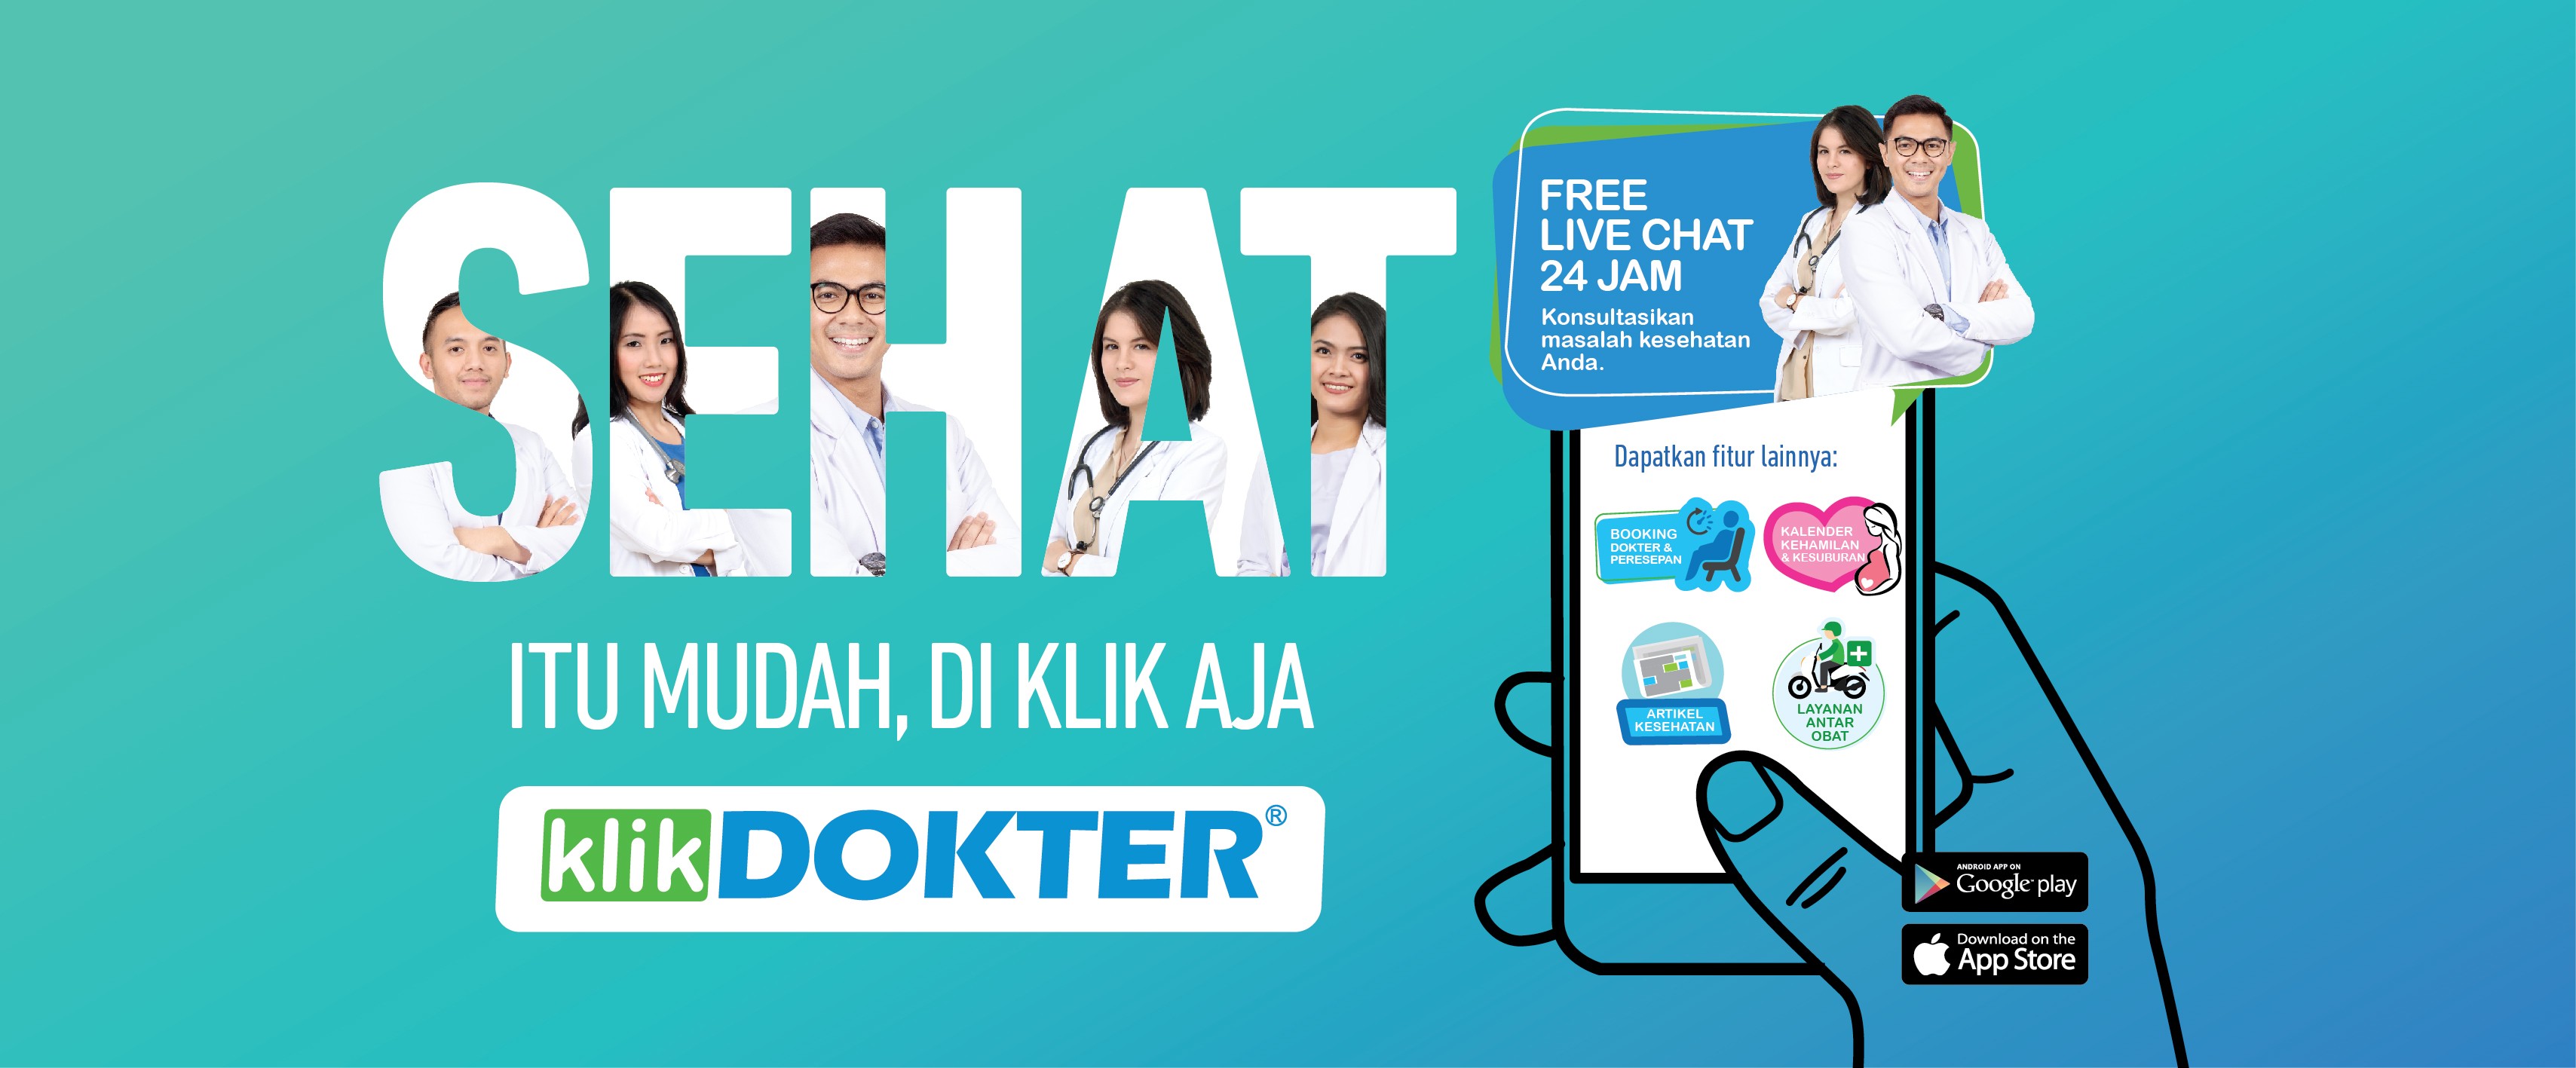 6 Indonesian Health Startups and Their Roles in Community